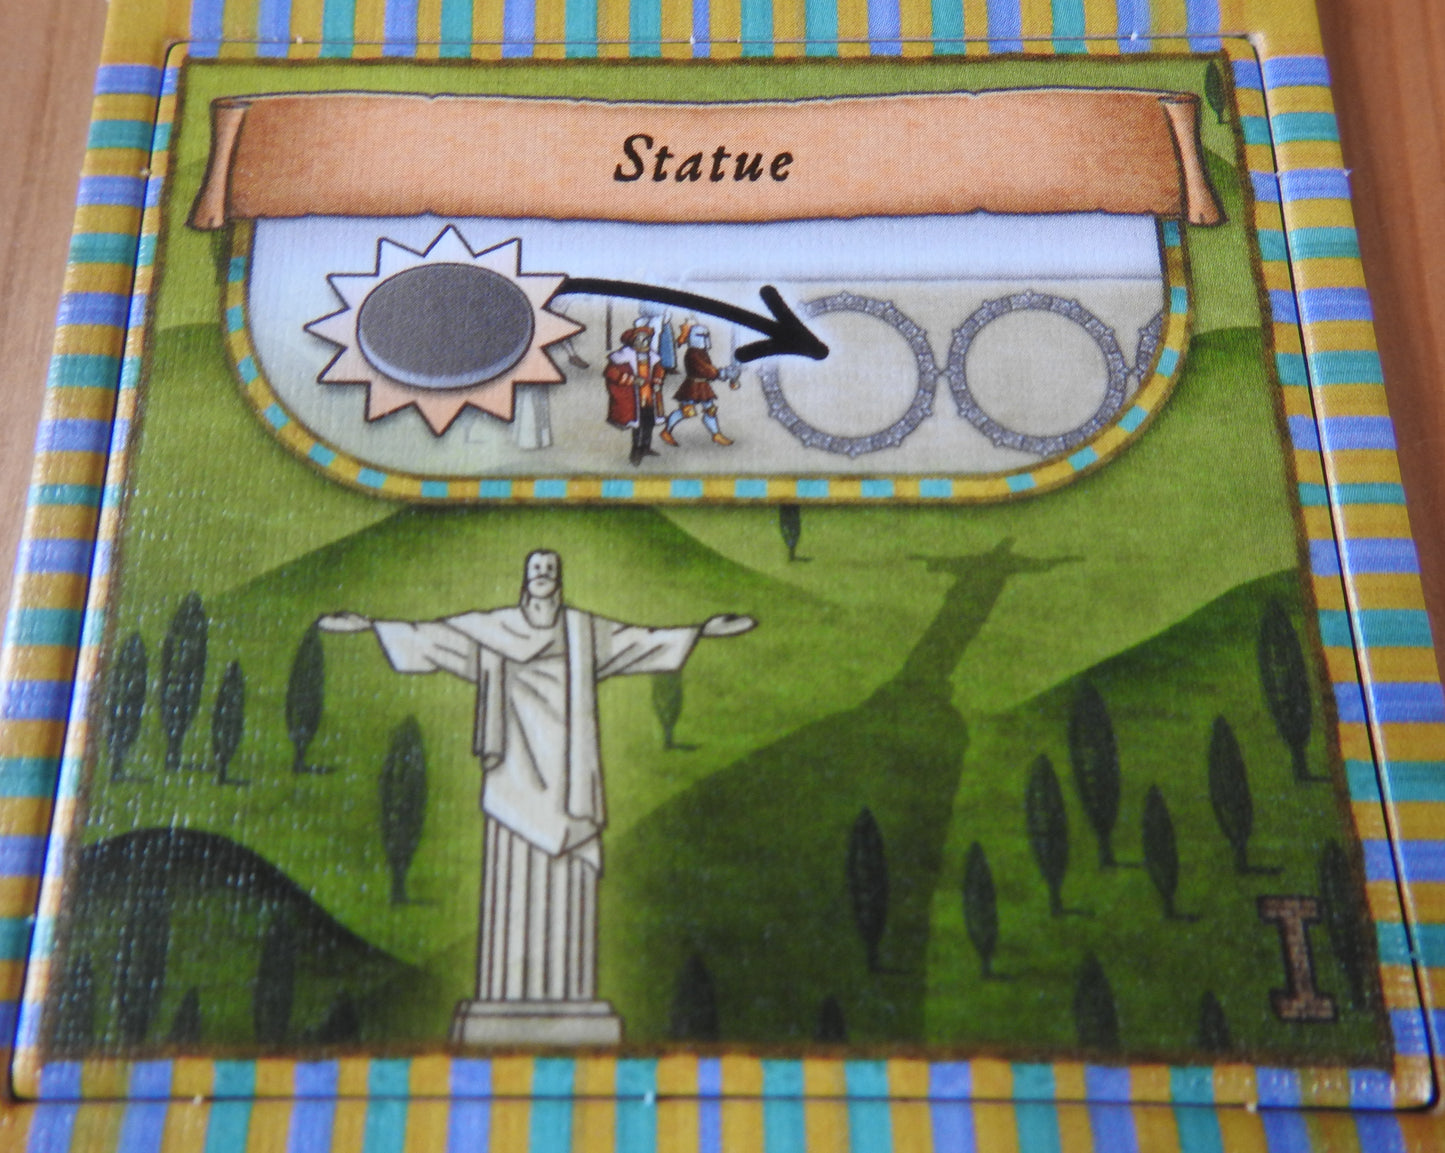 Close-up view of the Statue promo place tile.